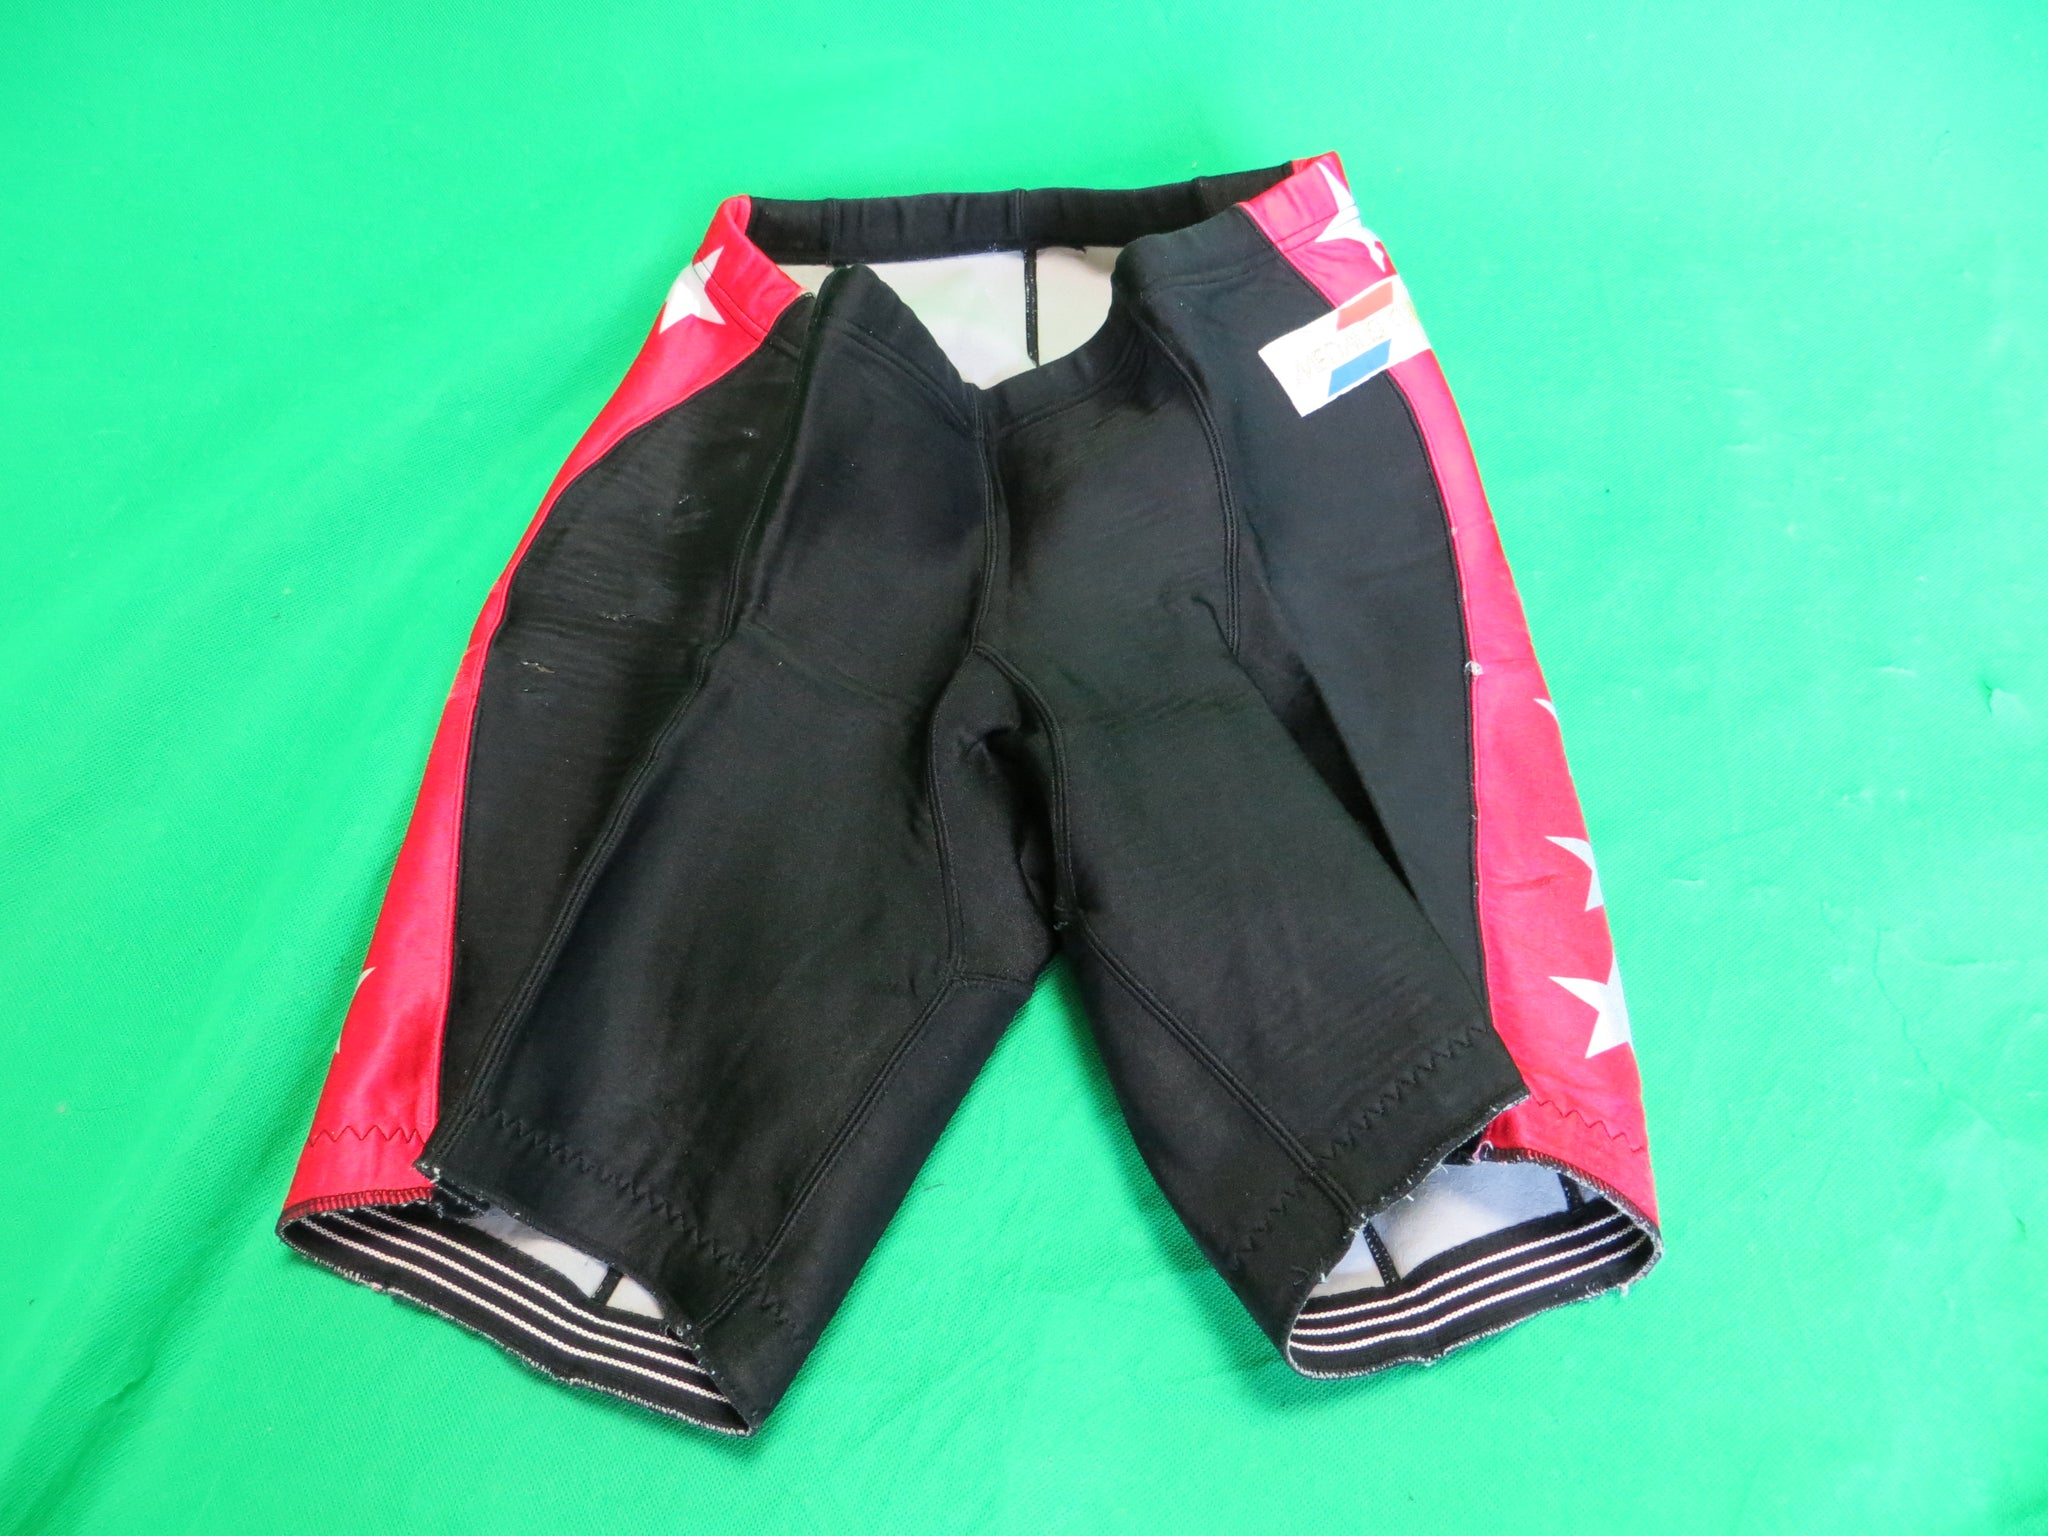 Medalist Club Authentic Keirin Shorts Japanese L Size #3 (American M)